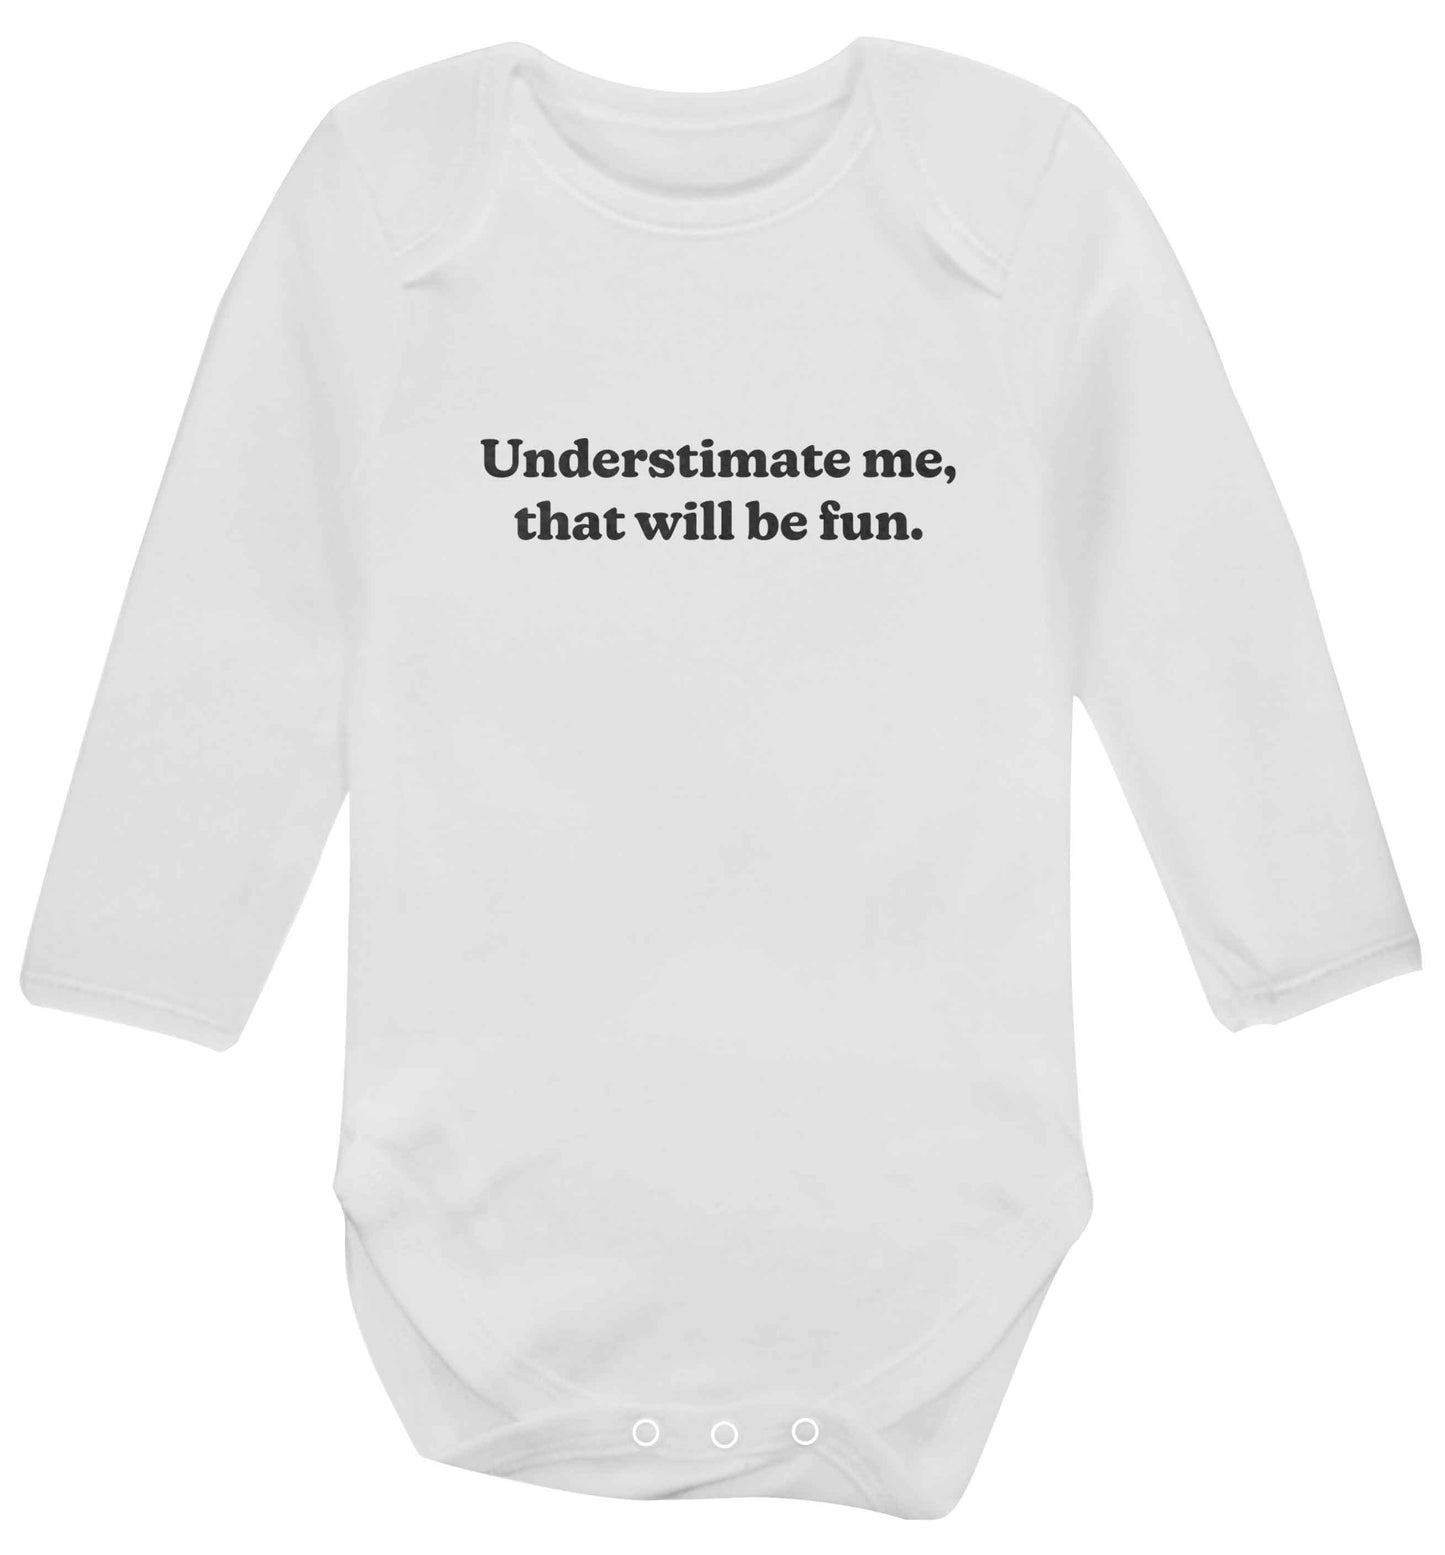 Underestimate me that will be fun baby vest long sleeved white 6-12 months